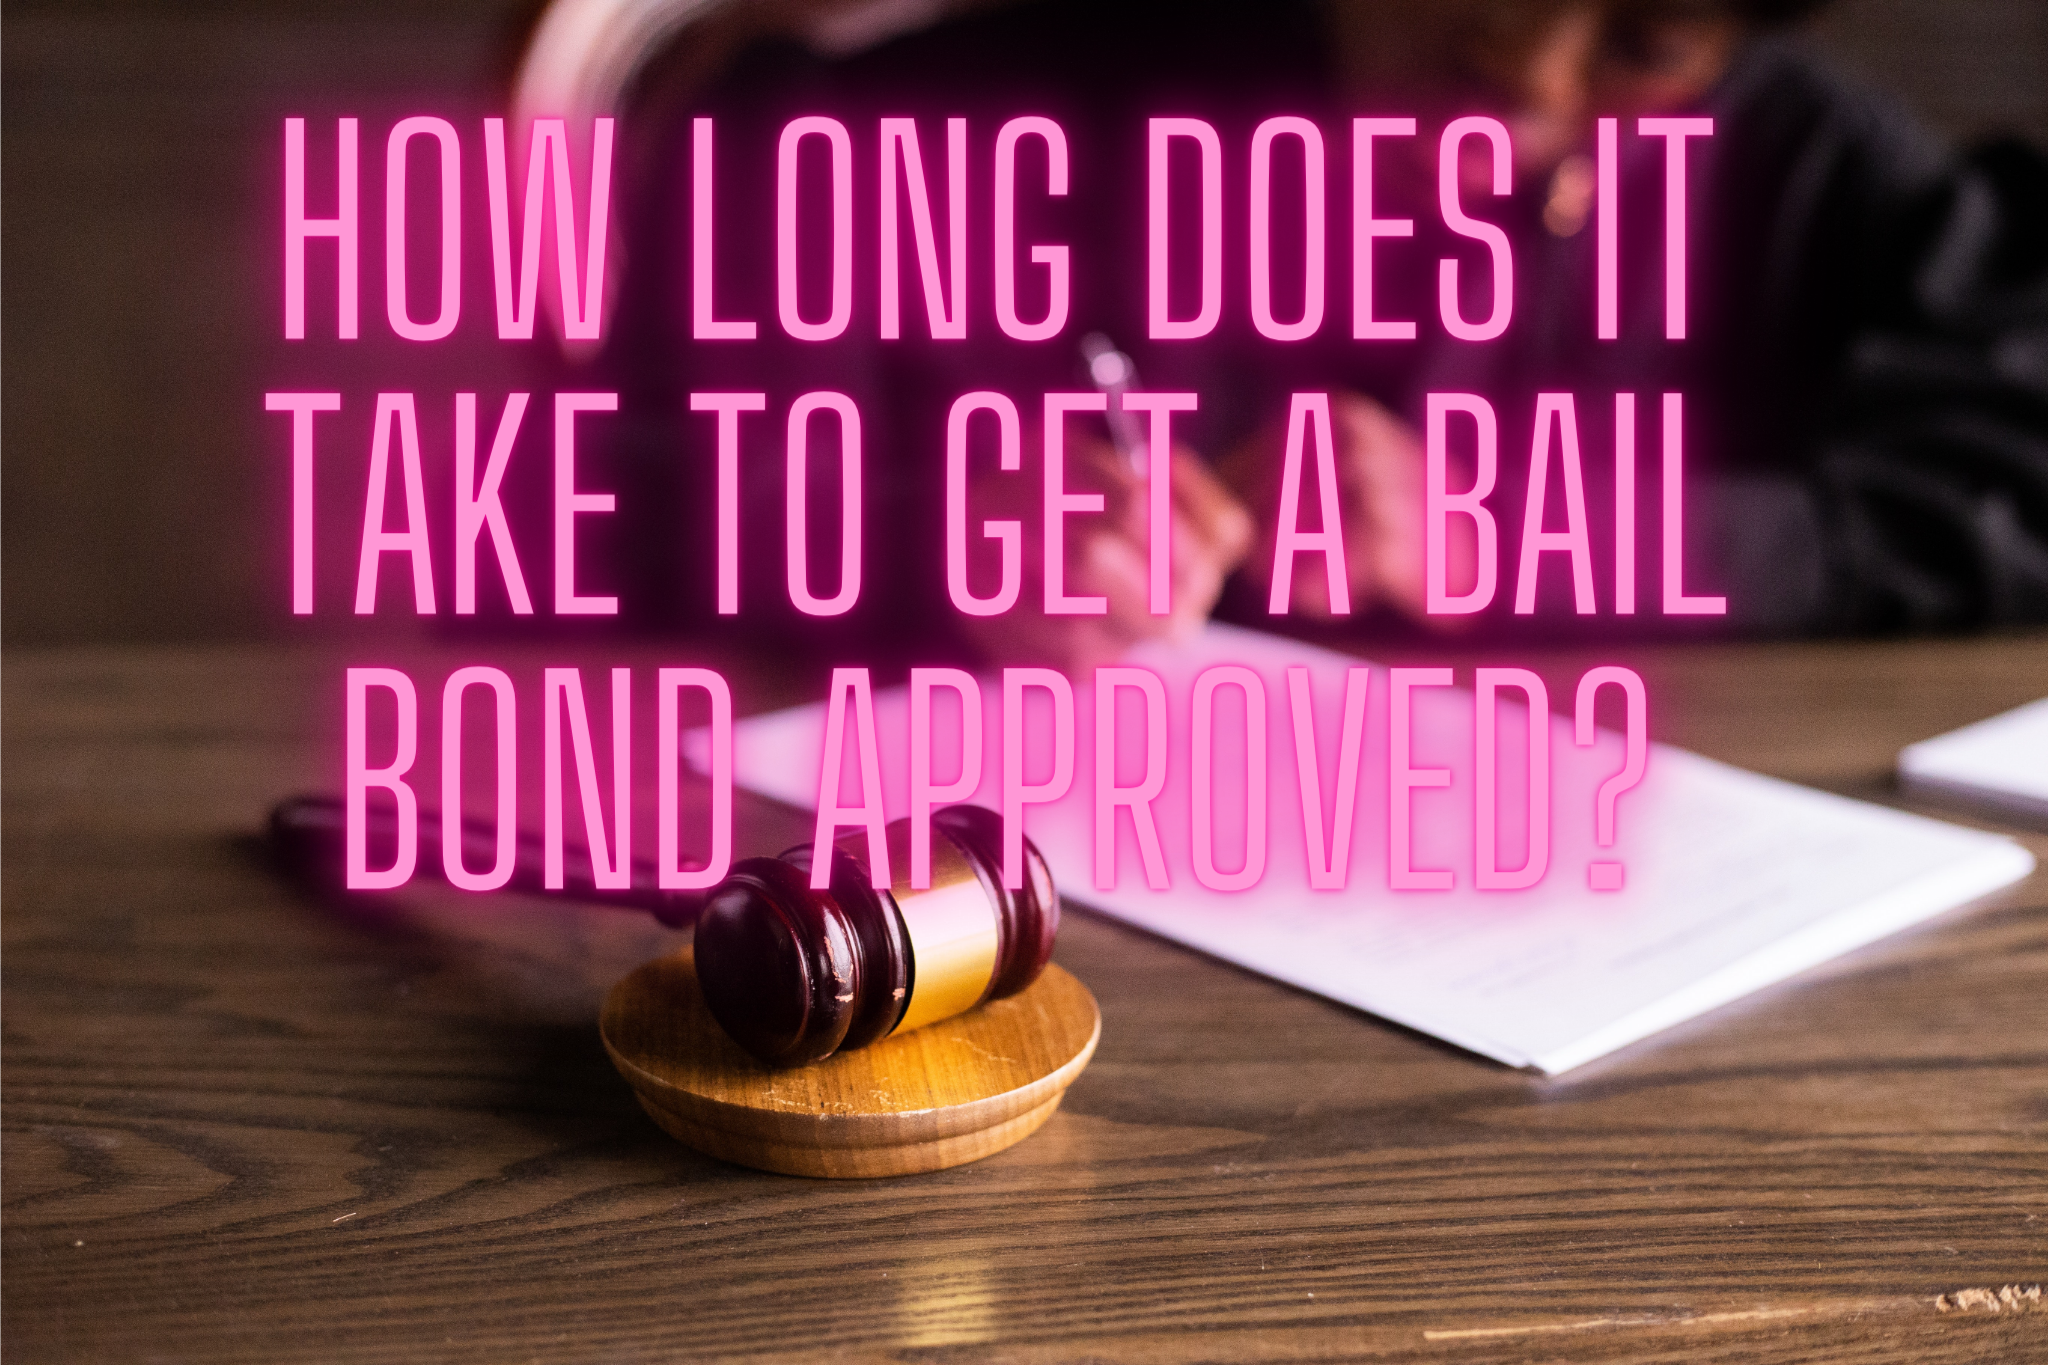 How long does it take to get a bail bond approved?